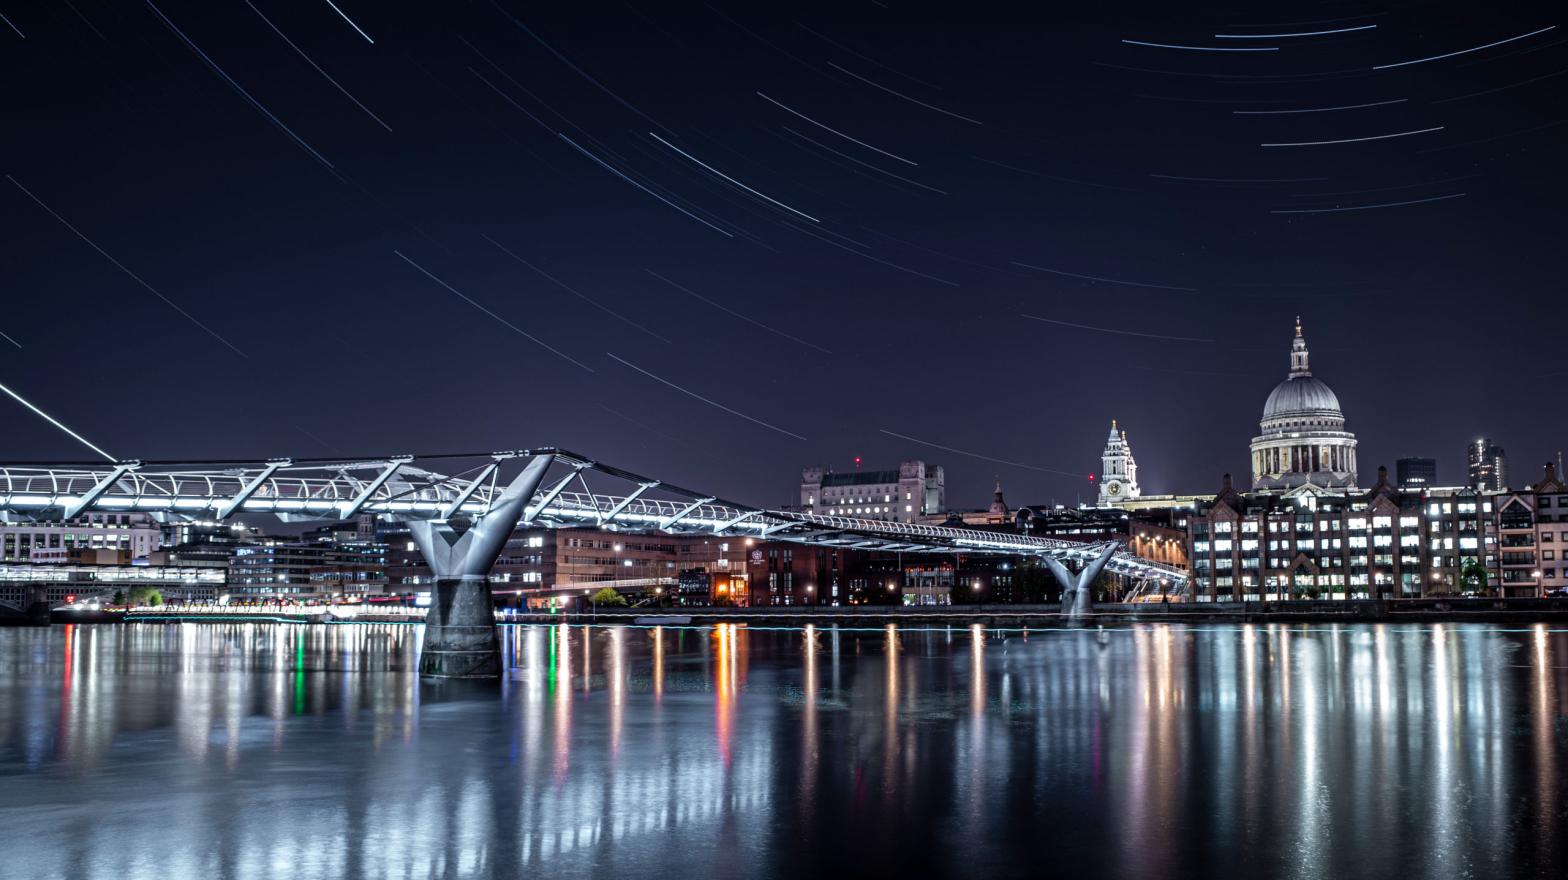 In this multi-exposure picture, the London Millennium Footbridge is illuminated under the stars on a clear night on April 21, 2020 in London. The clear skies created by the new moon coincide with the Lyrid meteor shower, an annual display caused by the Earth passing through a cloud of debris from a comet called C/186 Thatcher. (Photo: Simon Robling, Getty Images)